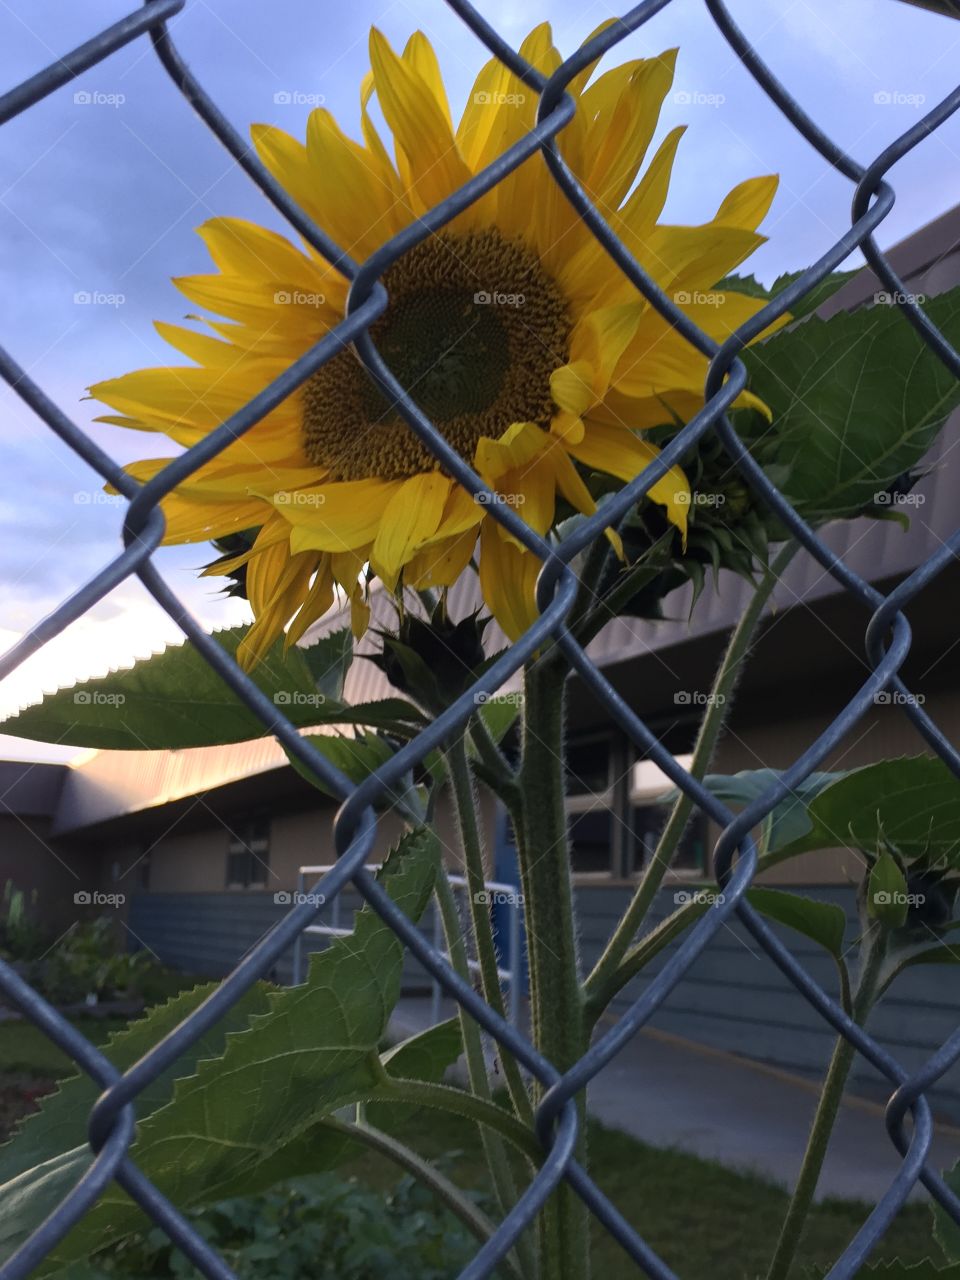 The irony of a beautiful flower captured as a photo forever mine while behind a caged fence makes this picture deepen summers end to me.